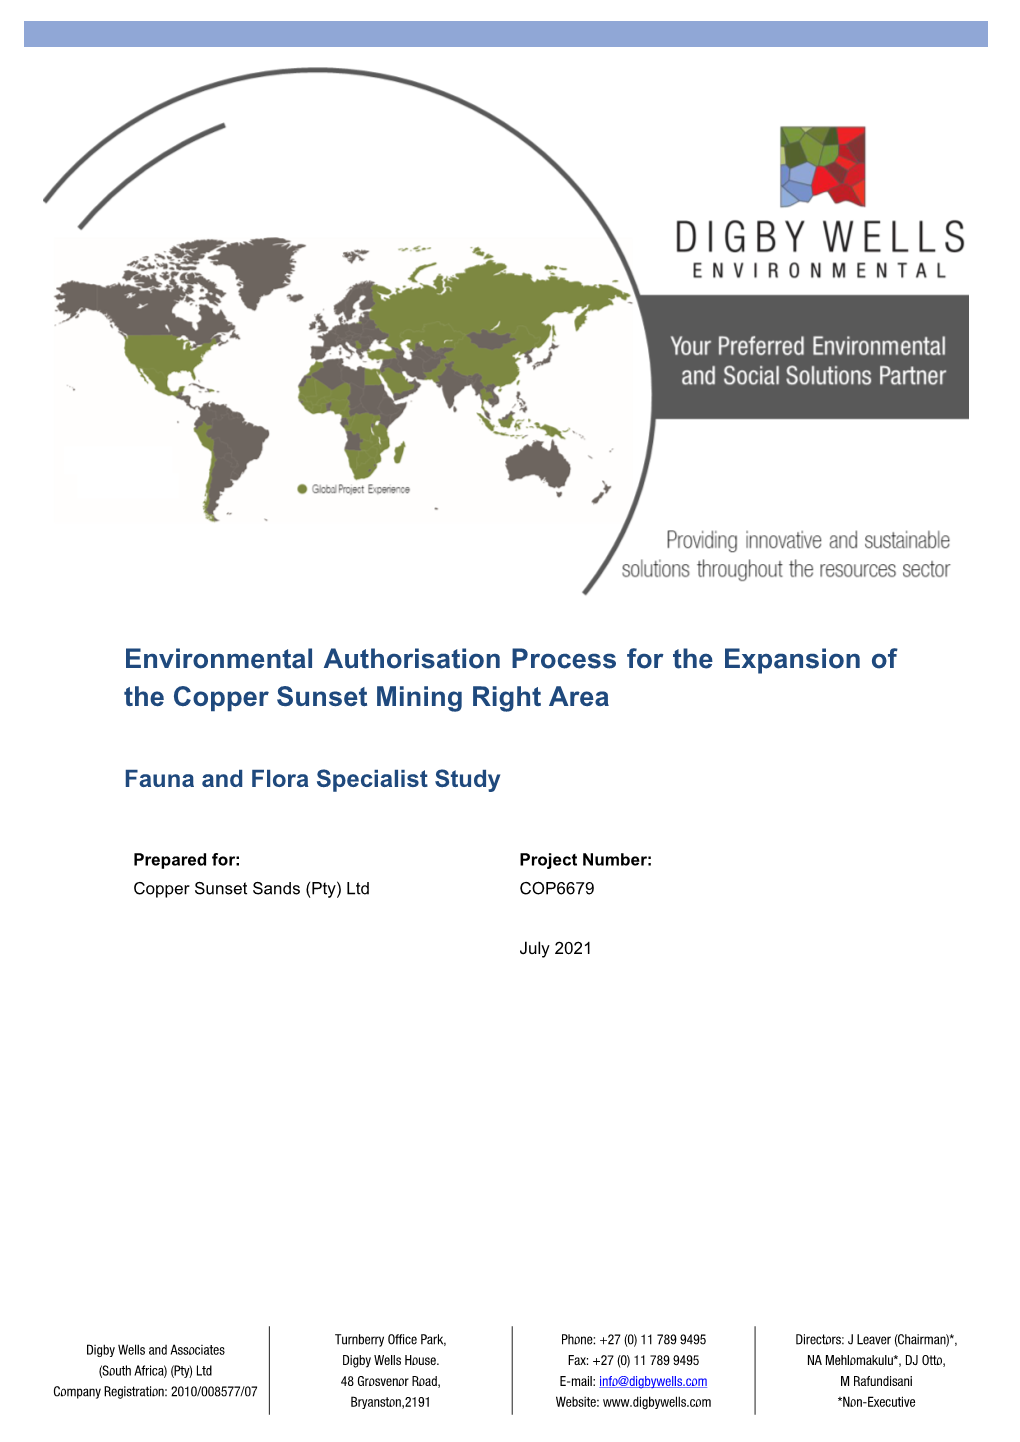 Environmental Authorisation Process for the Expansion of the Copper Sunset Mining Right Area